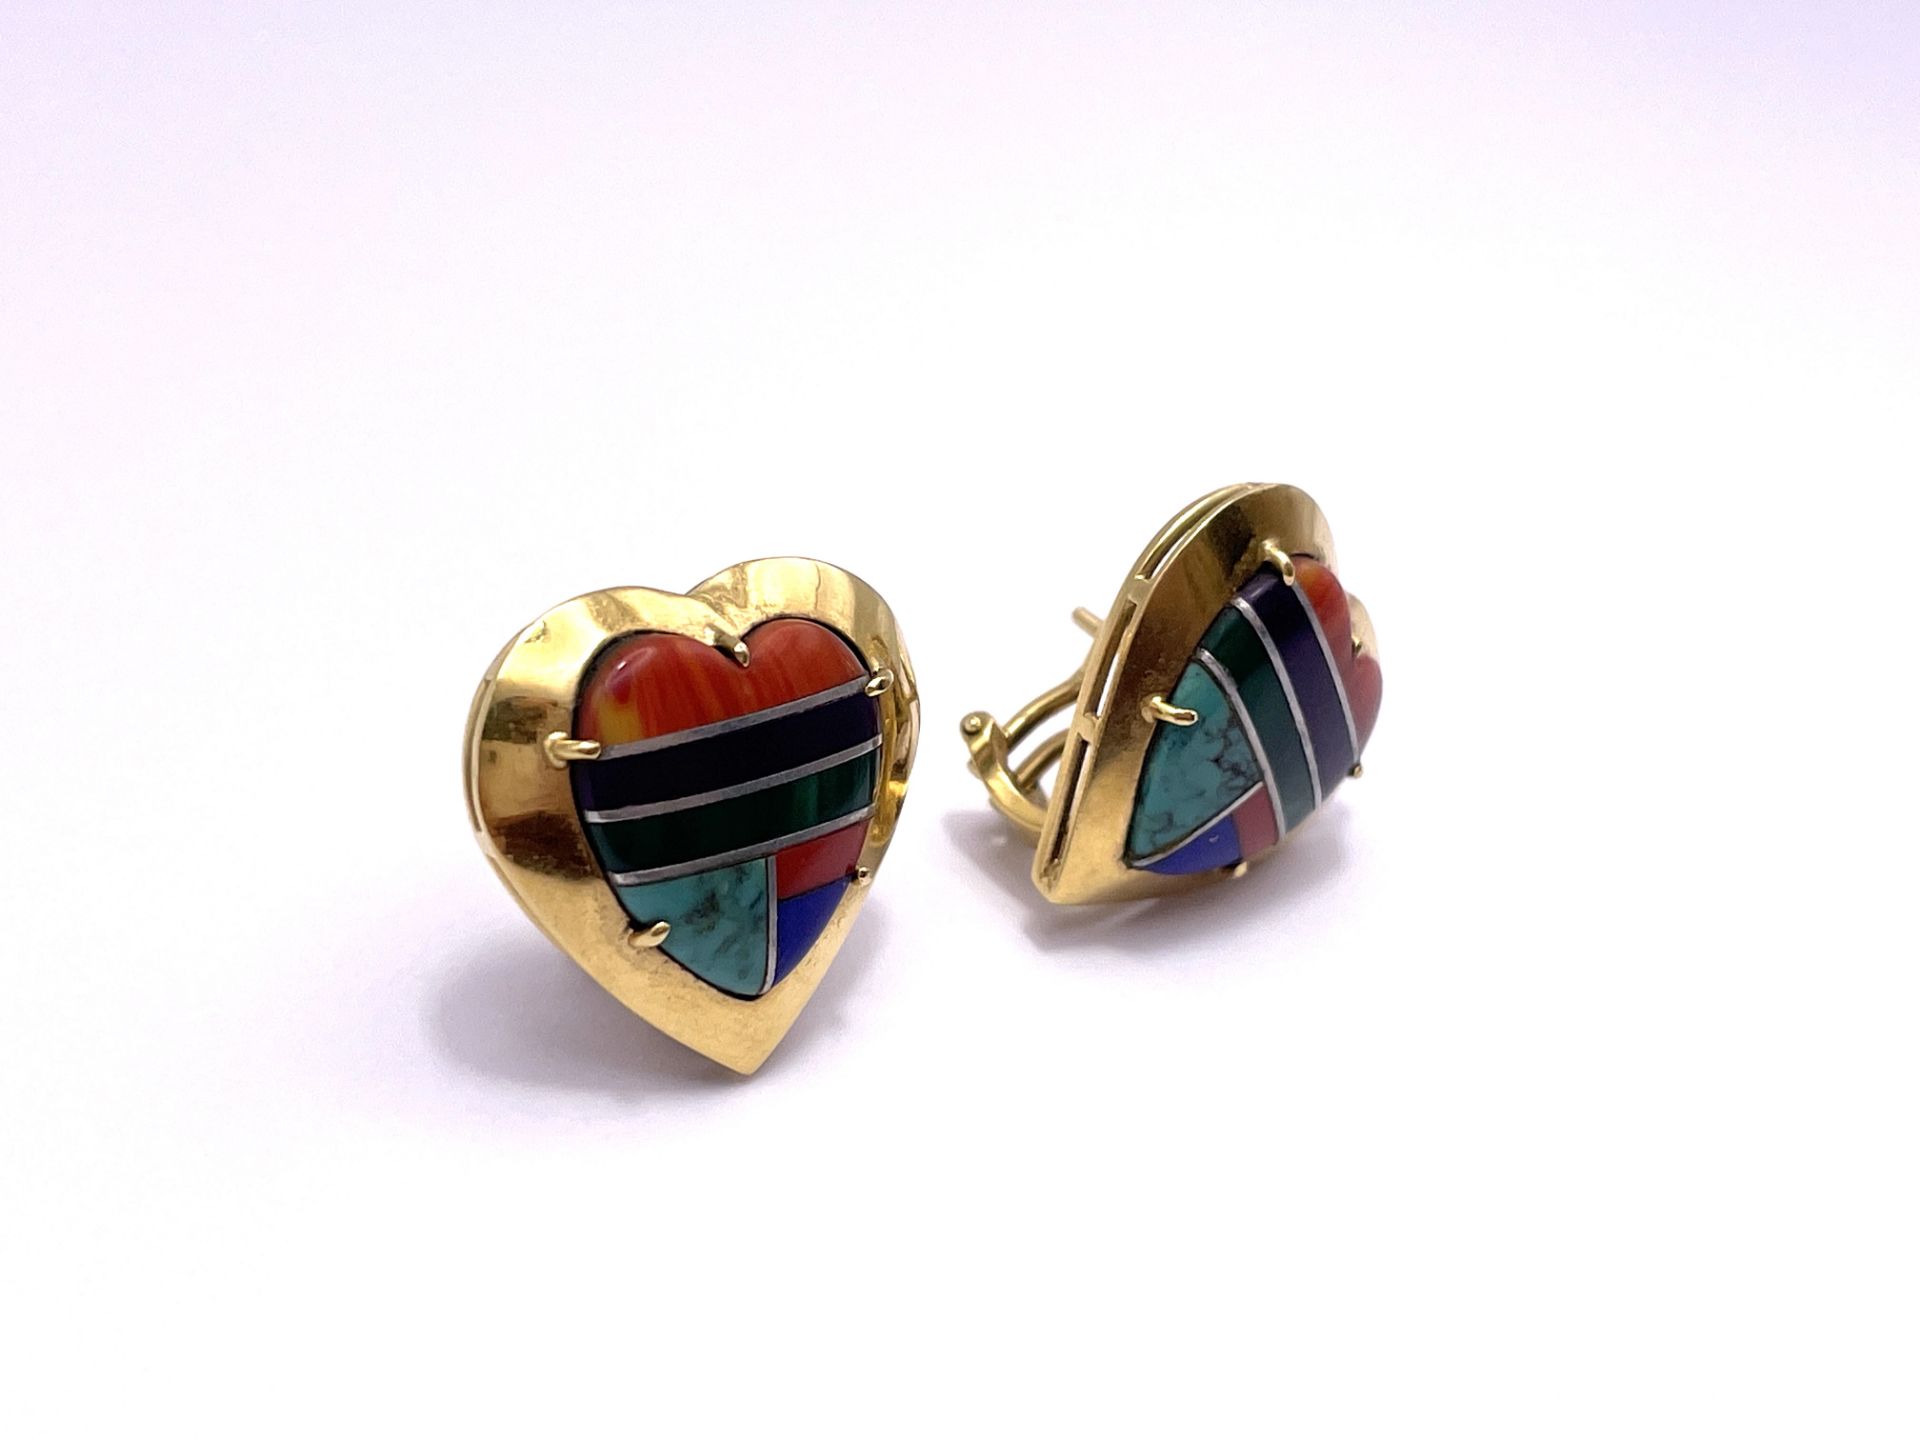 Pair of heart-shaped stud clip earrings - Image 5 of 6